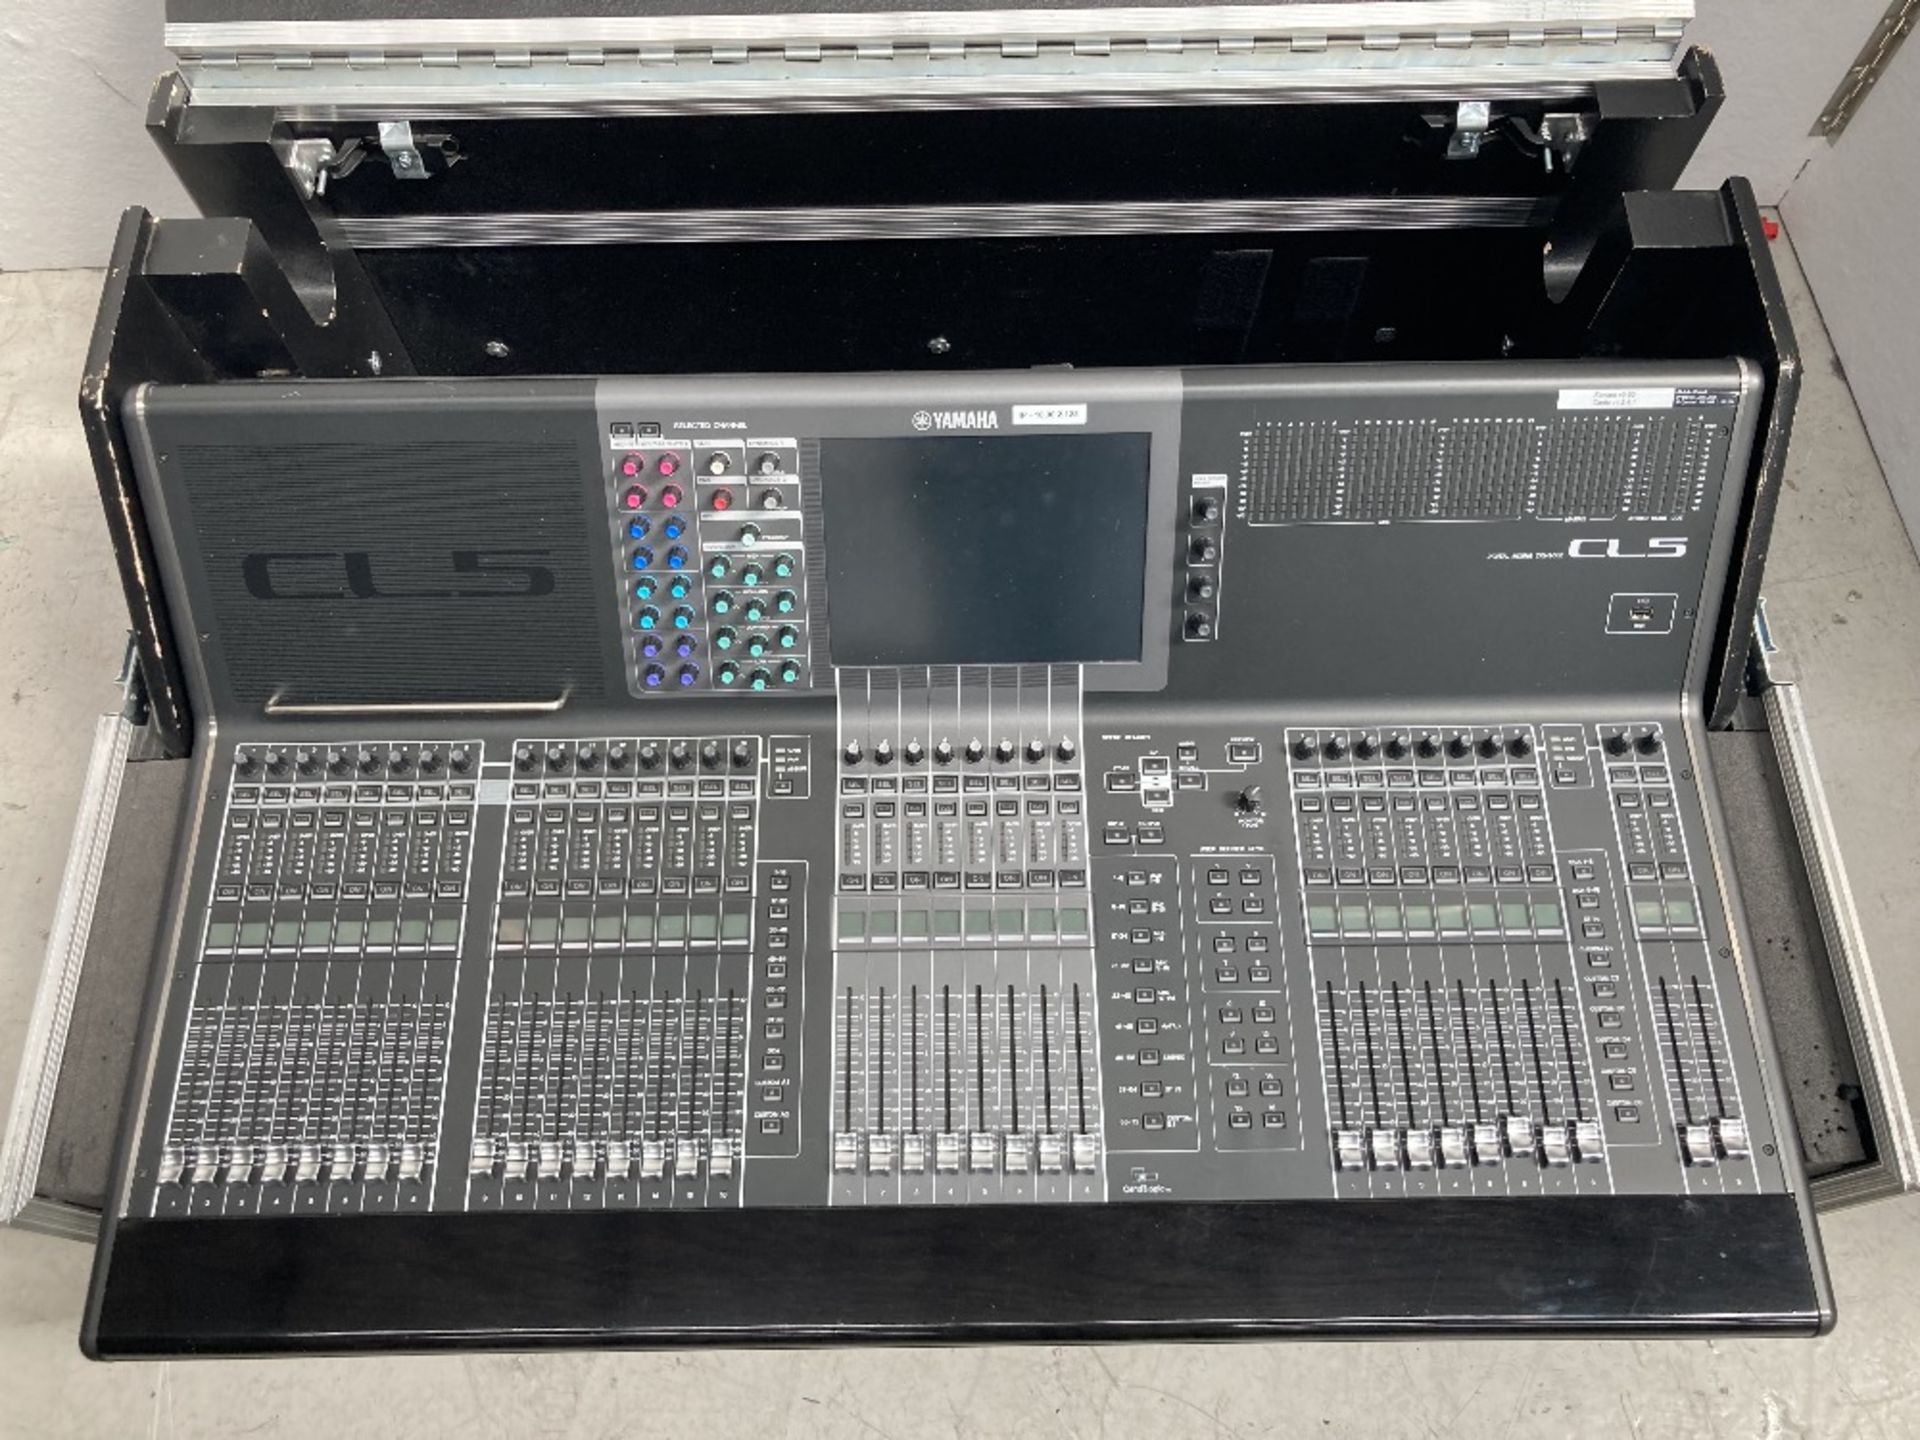 Yamaha CL5 Digital Mixing Console & Heavy Duty Mobile Flight Case - Image 10 of 14